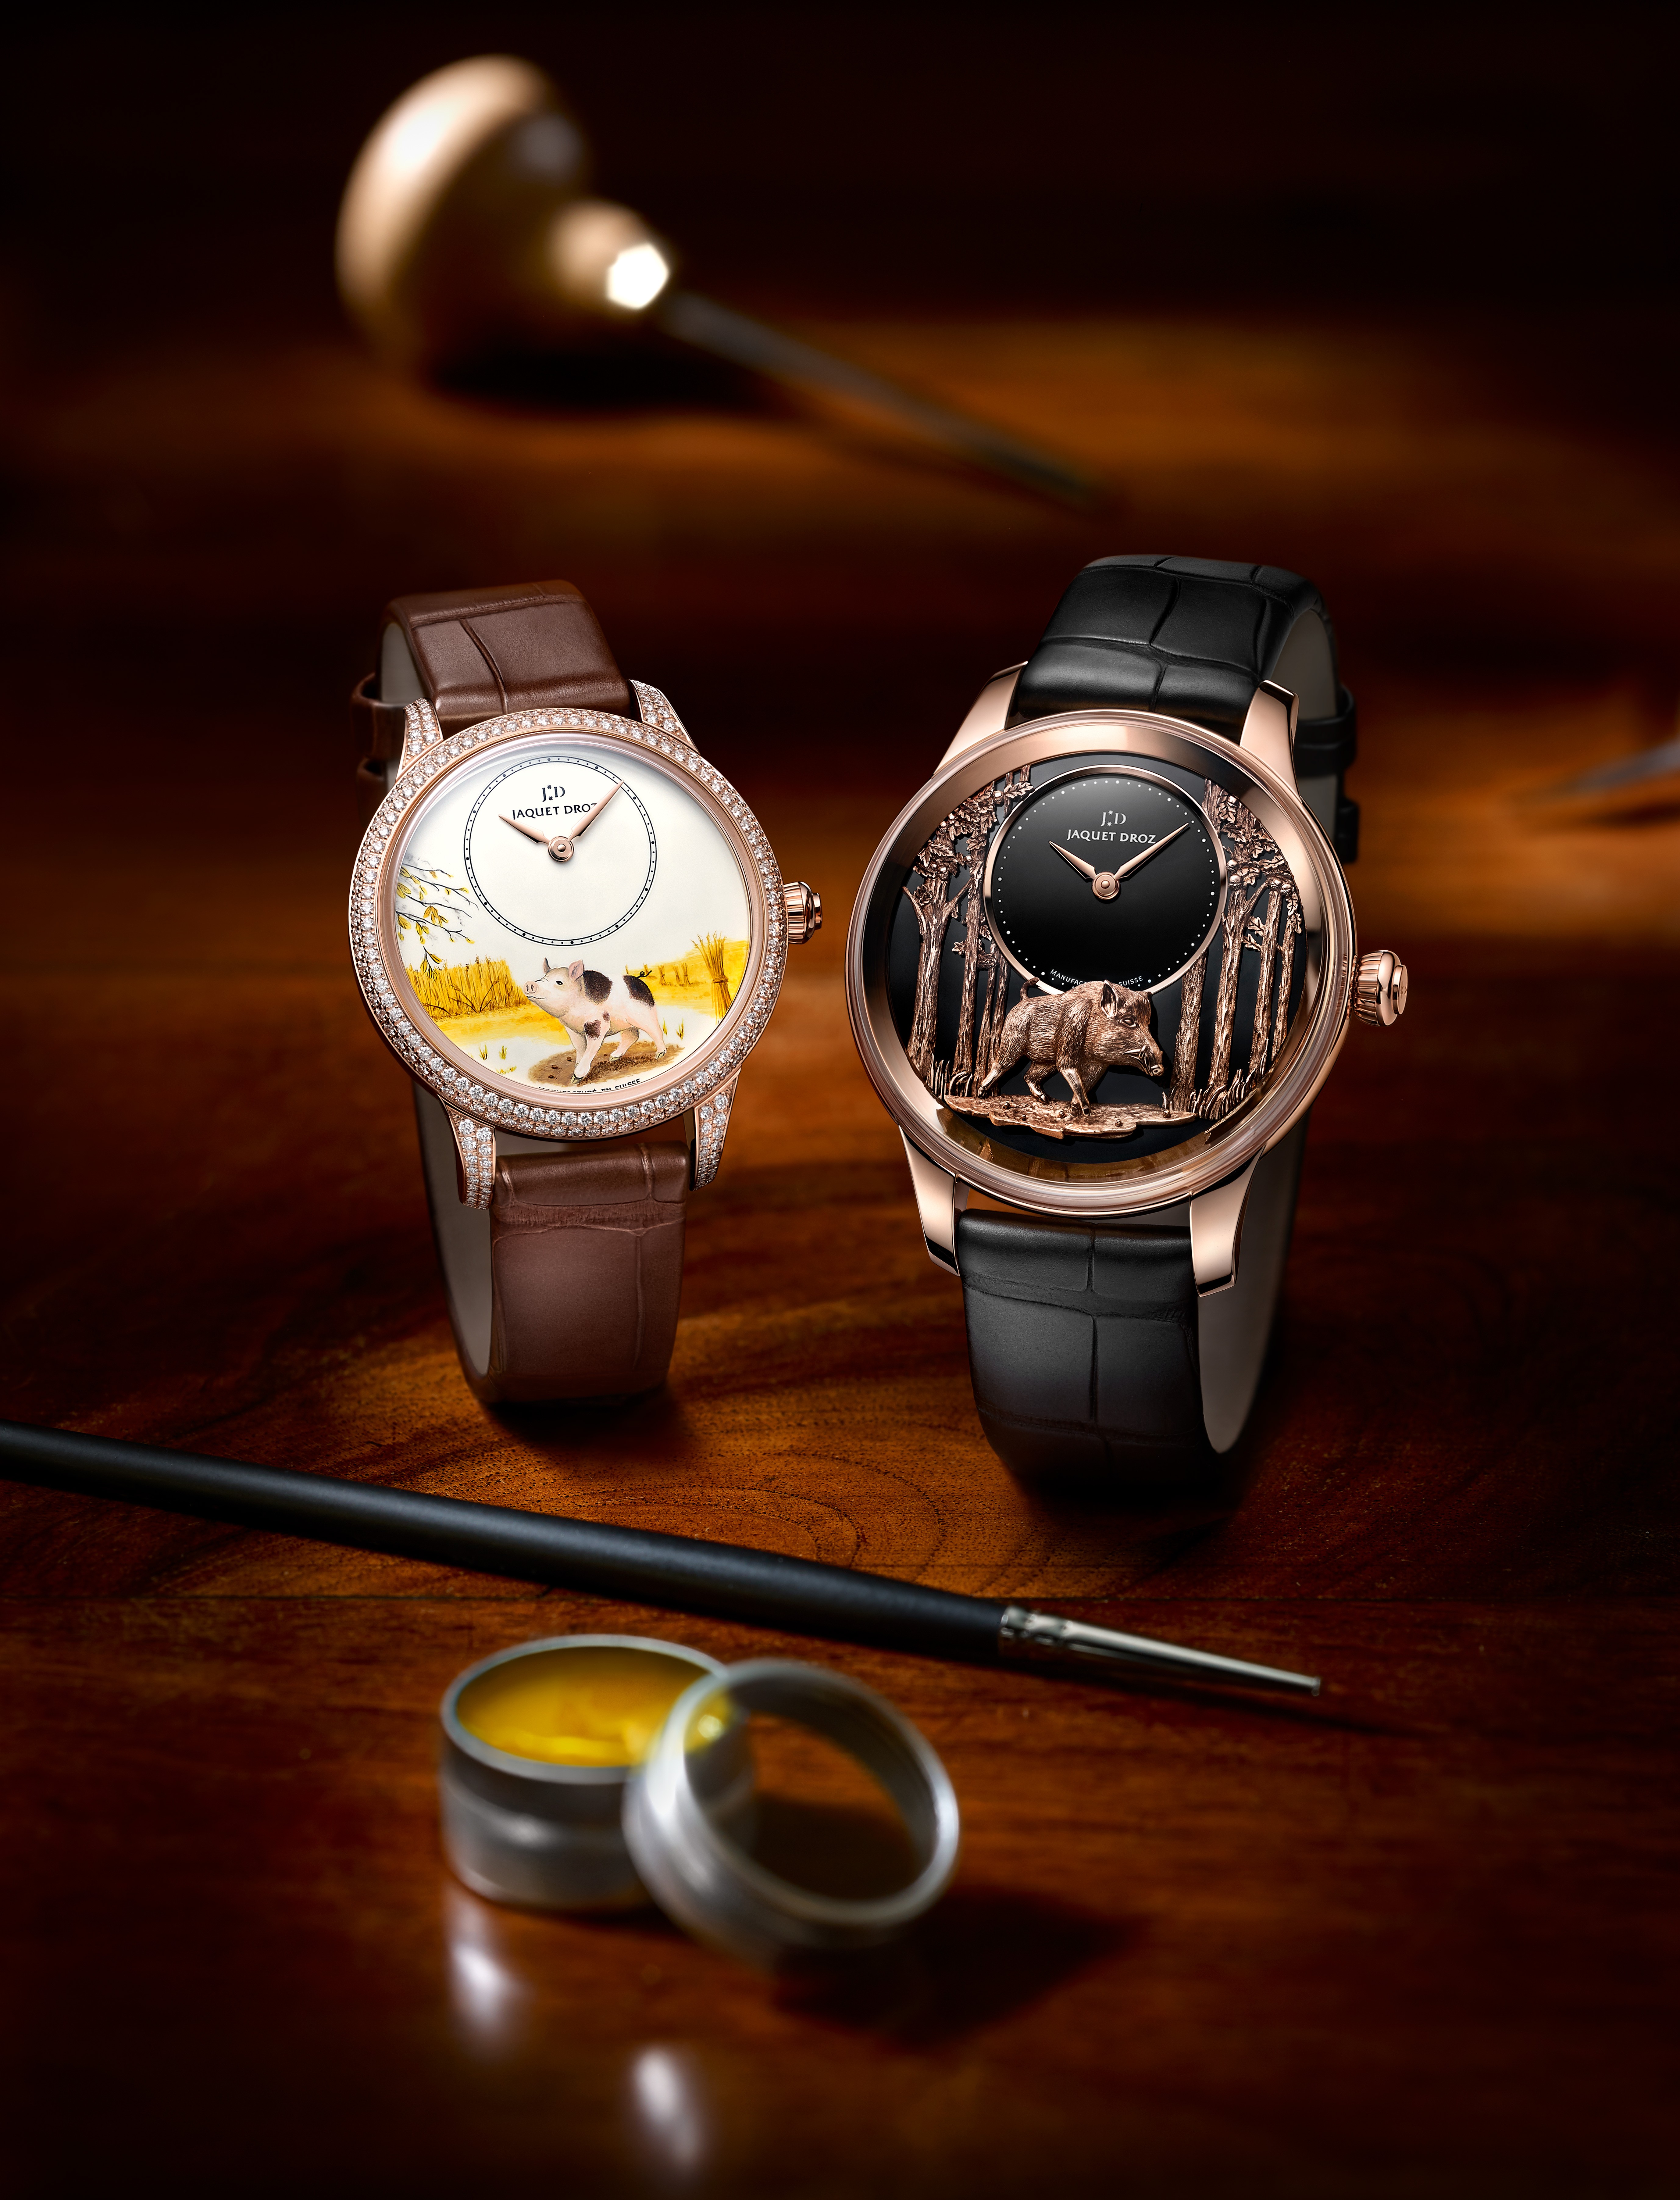 Jaquet Droz' Year of the Pig watches.